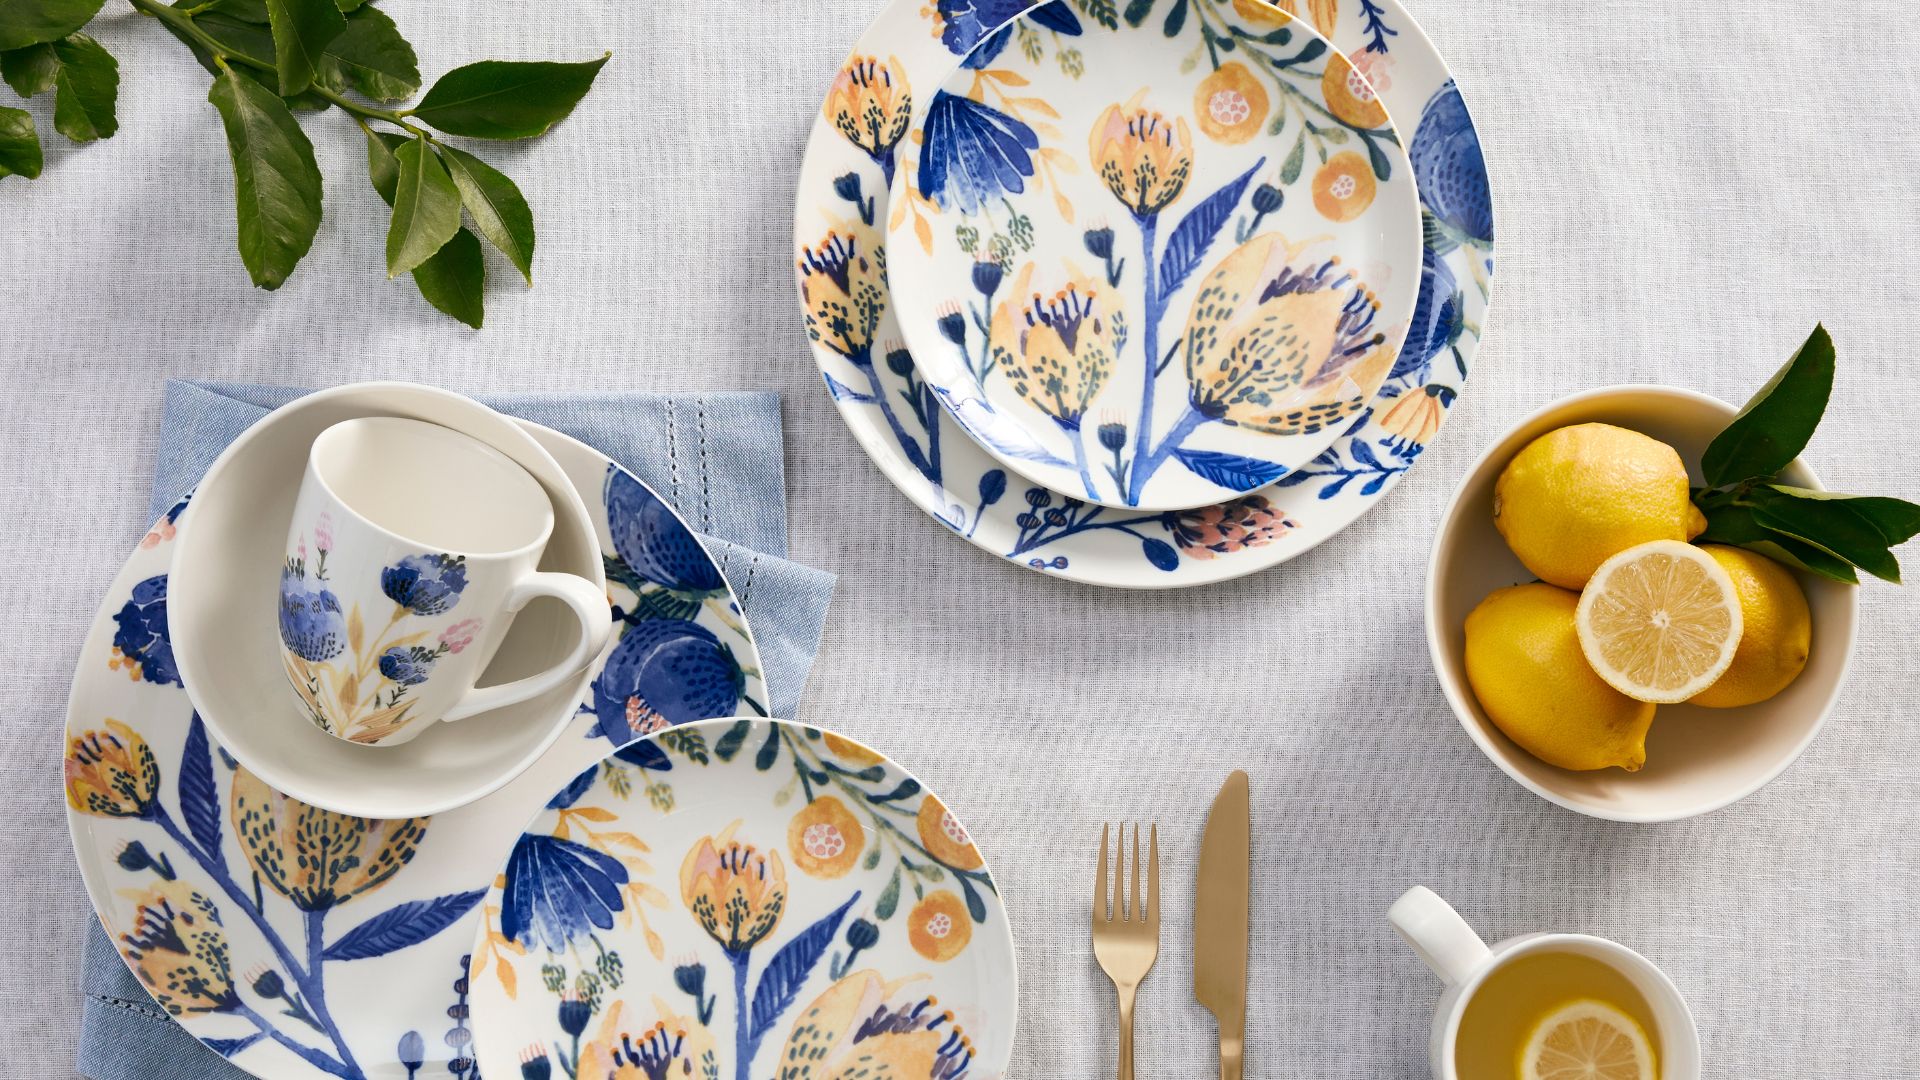 Matching floral dinnerware set for casual spring dining